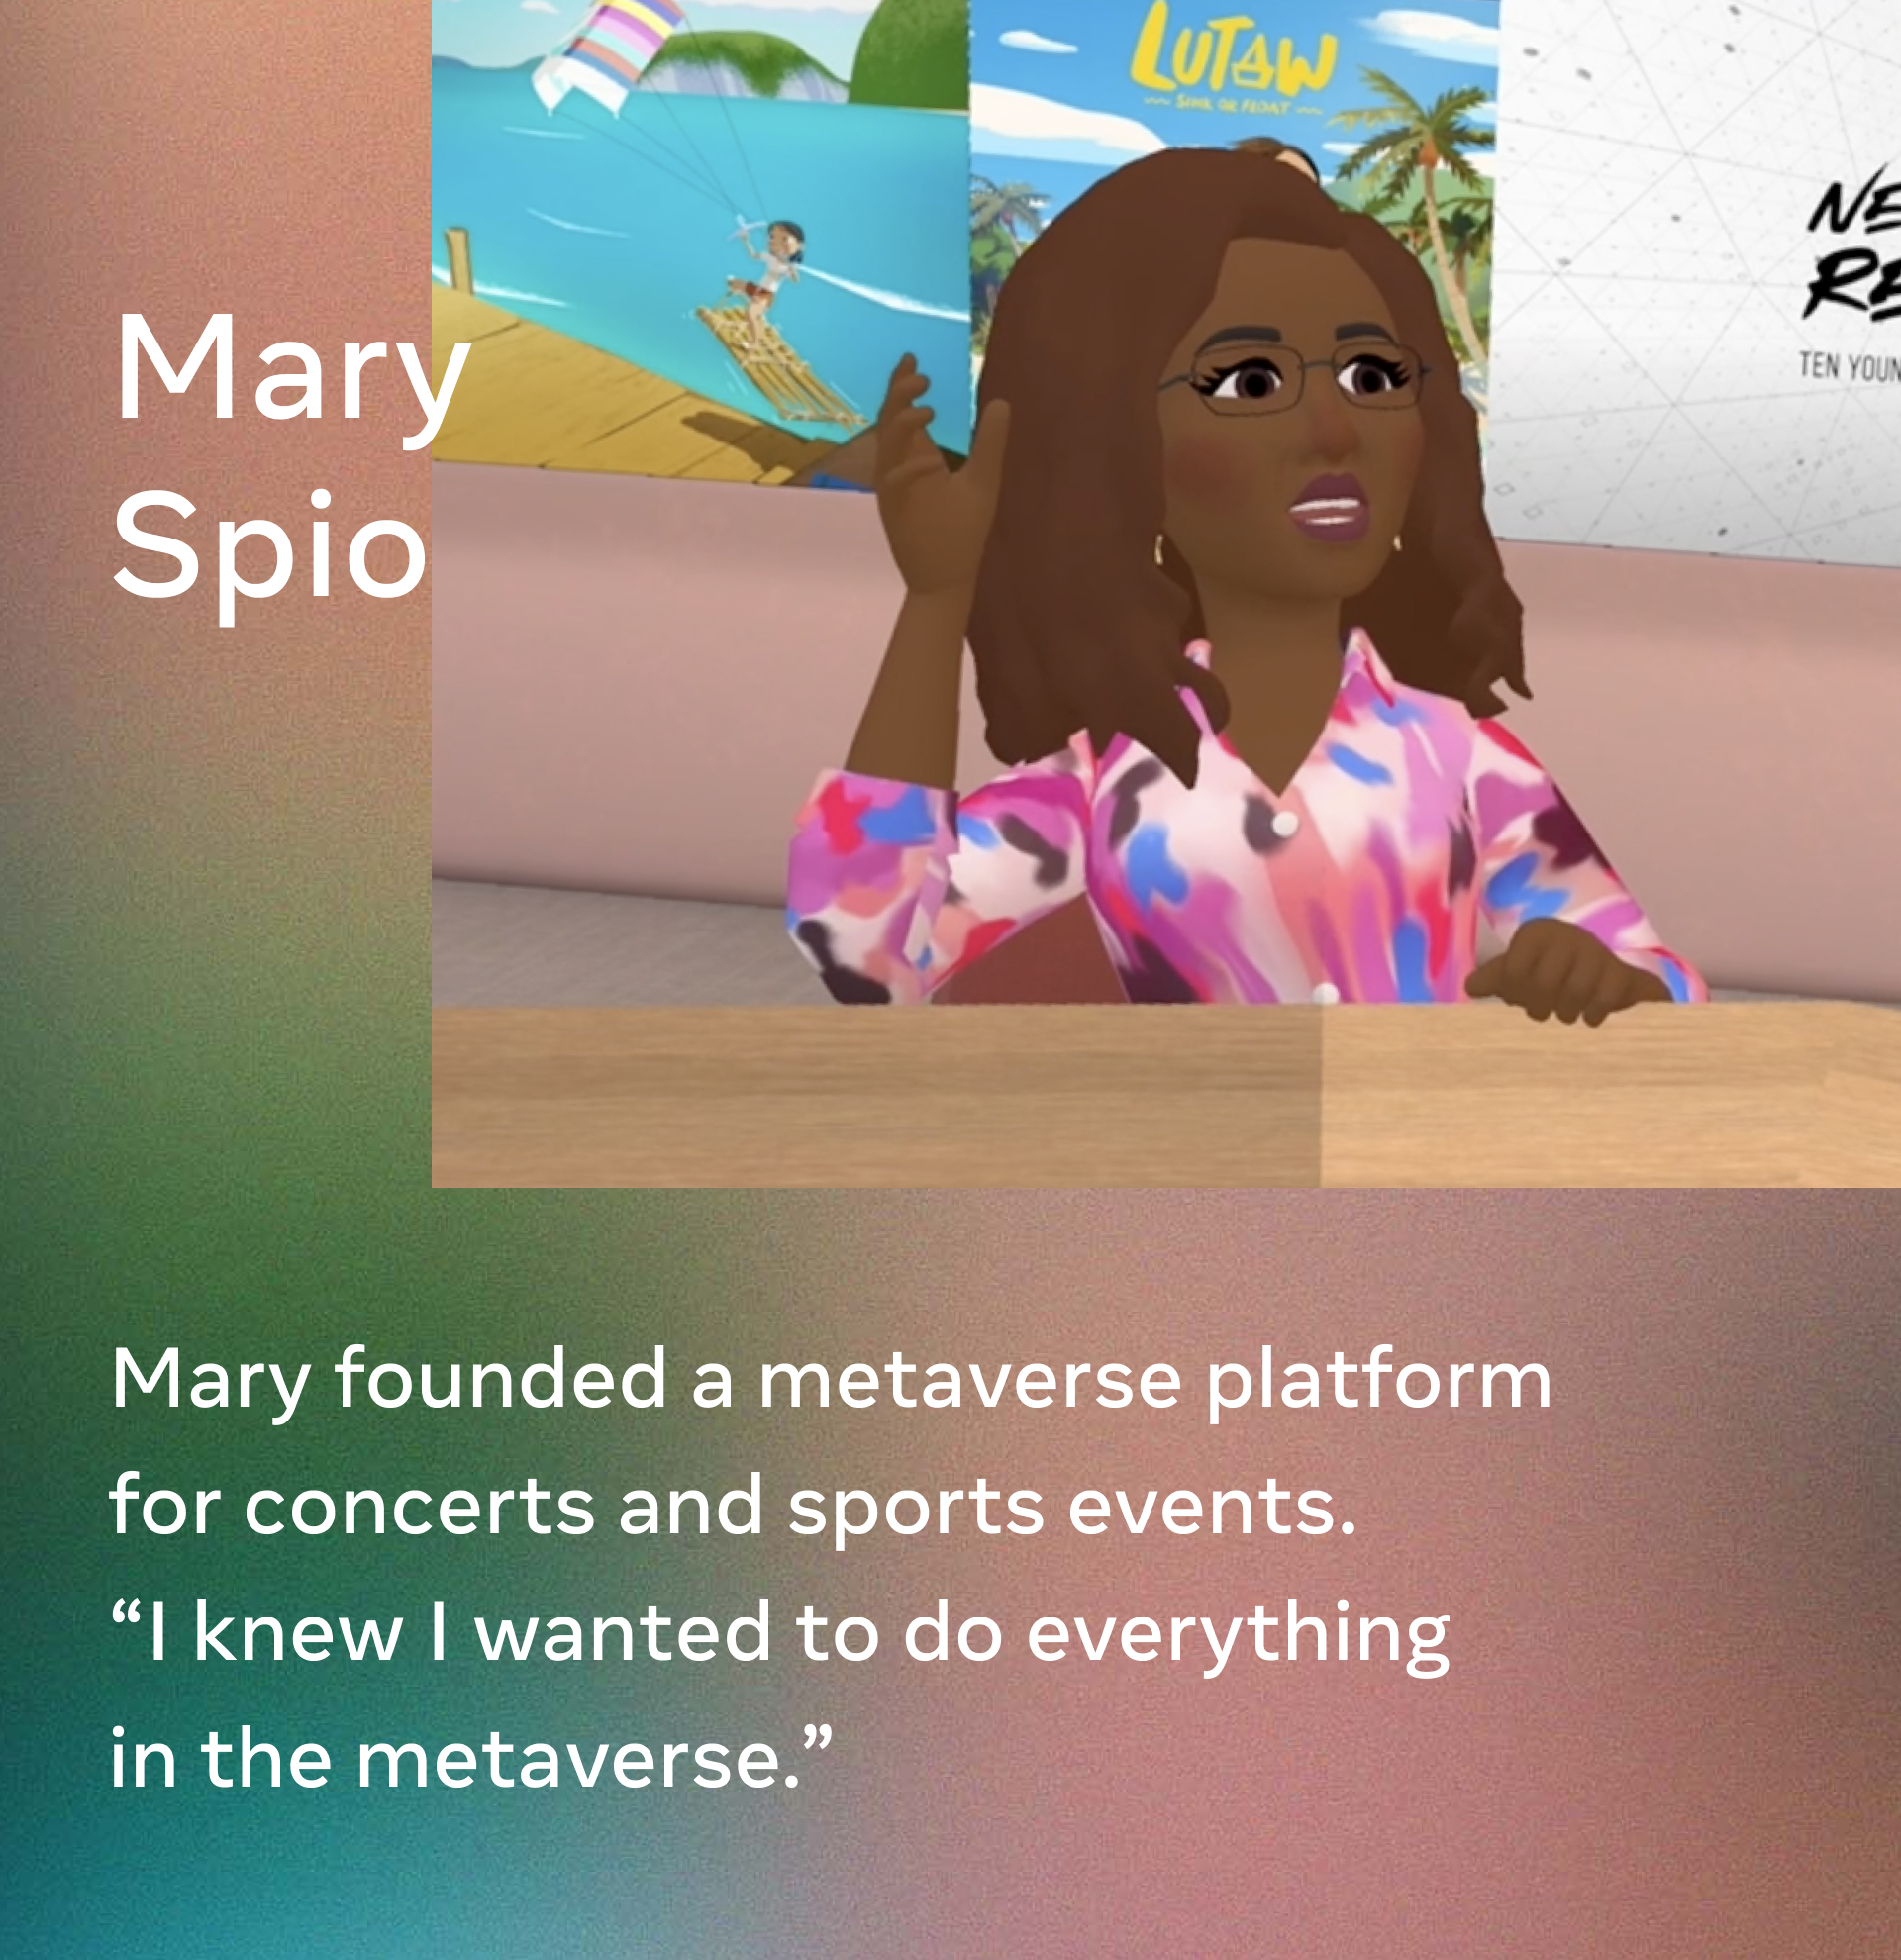 Mary Spio. Mary founded a metaverse platform for concerts and sports events. “I knew I wanted to do everything in the metaverse.”